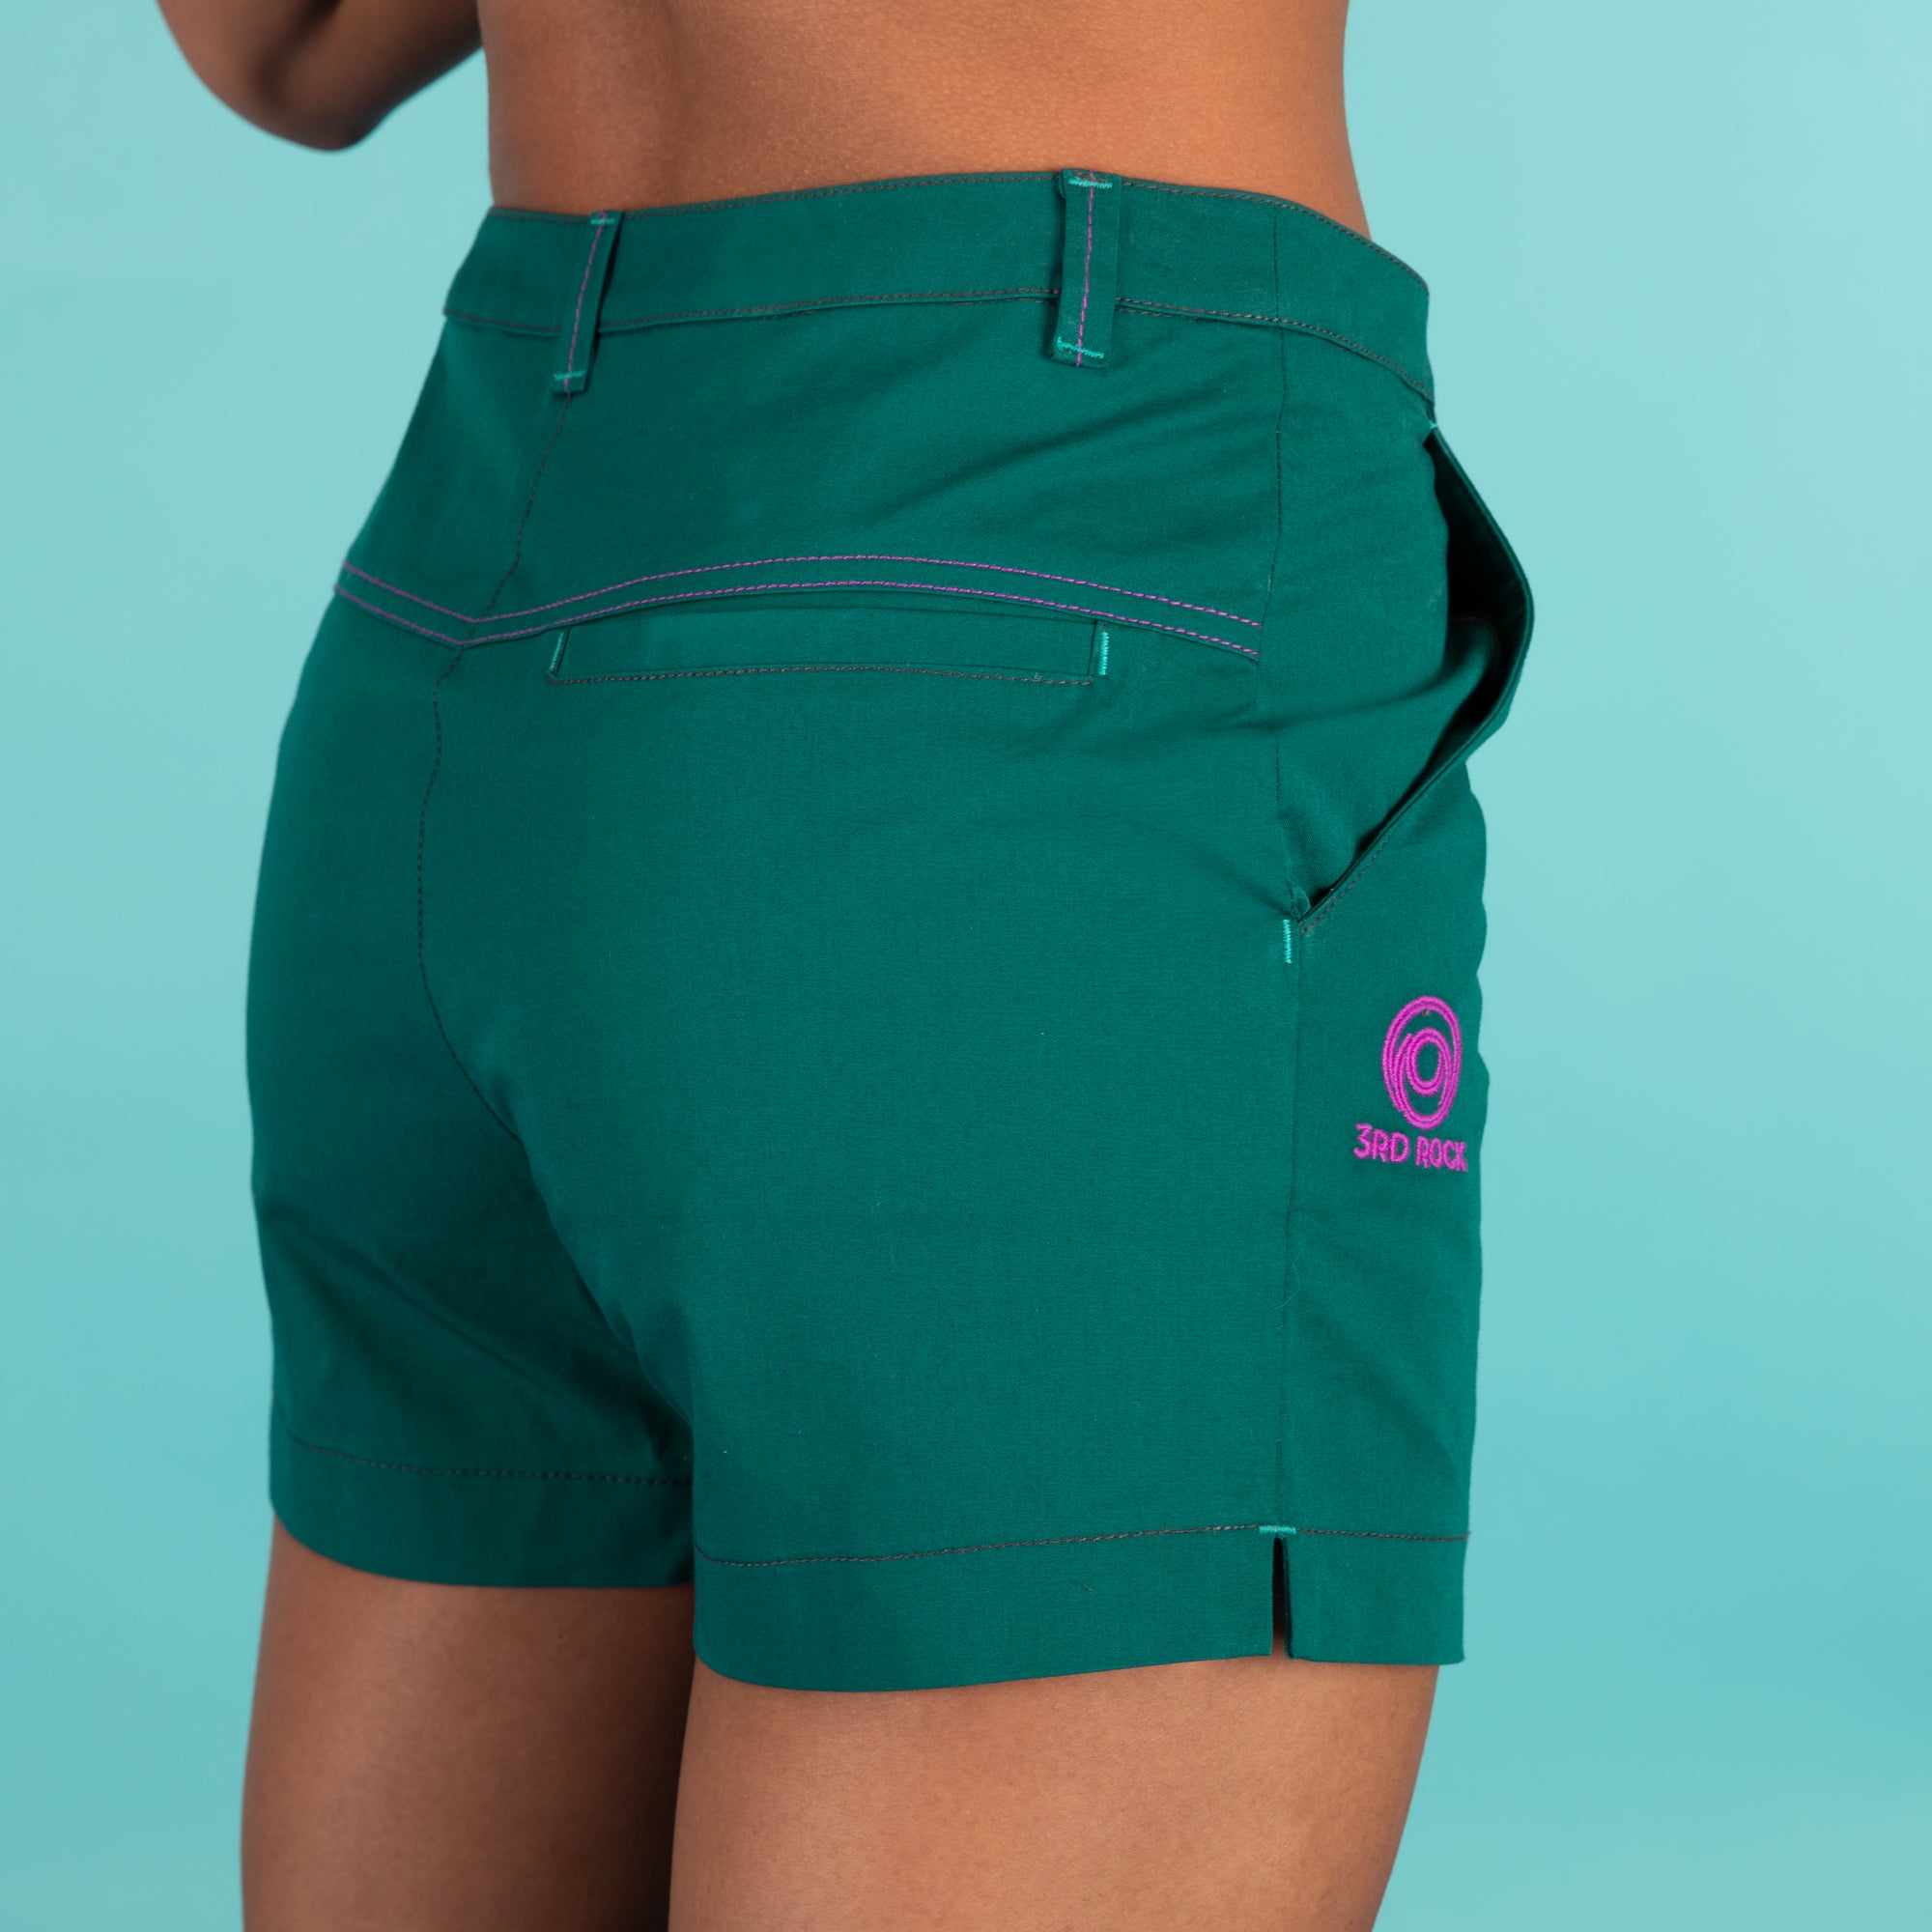 MARY Shorts | Lightweight Organic Cotton | 3RD ROCK Clothing -  Kendal is 5ft8" with 38" hips and wears a size 10. F